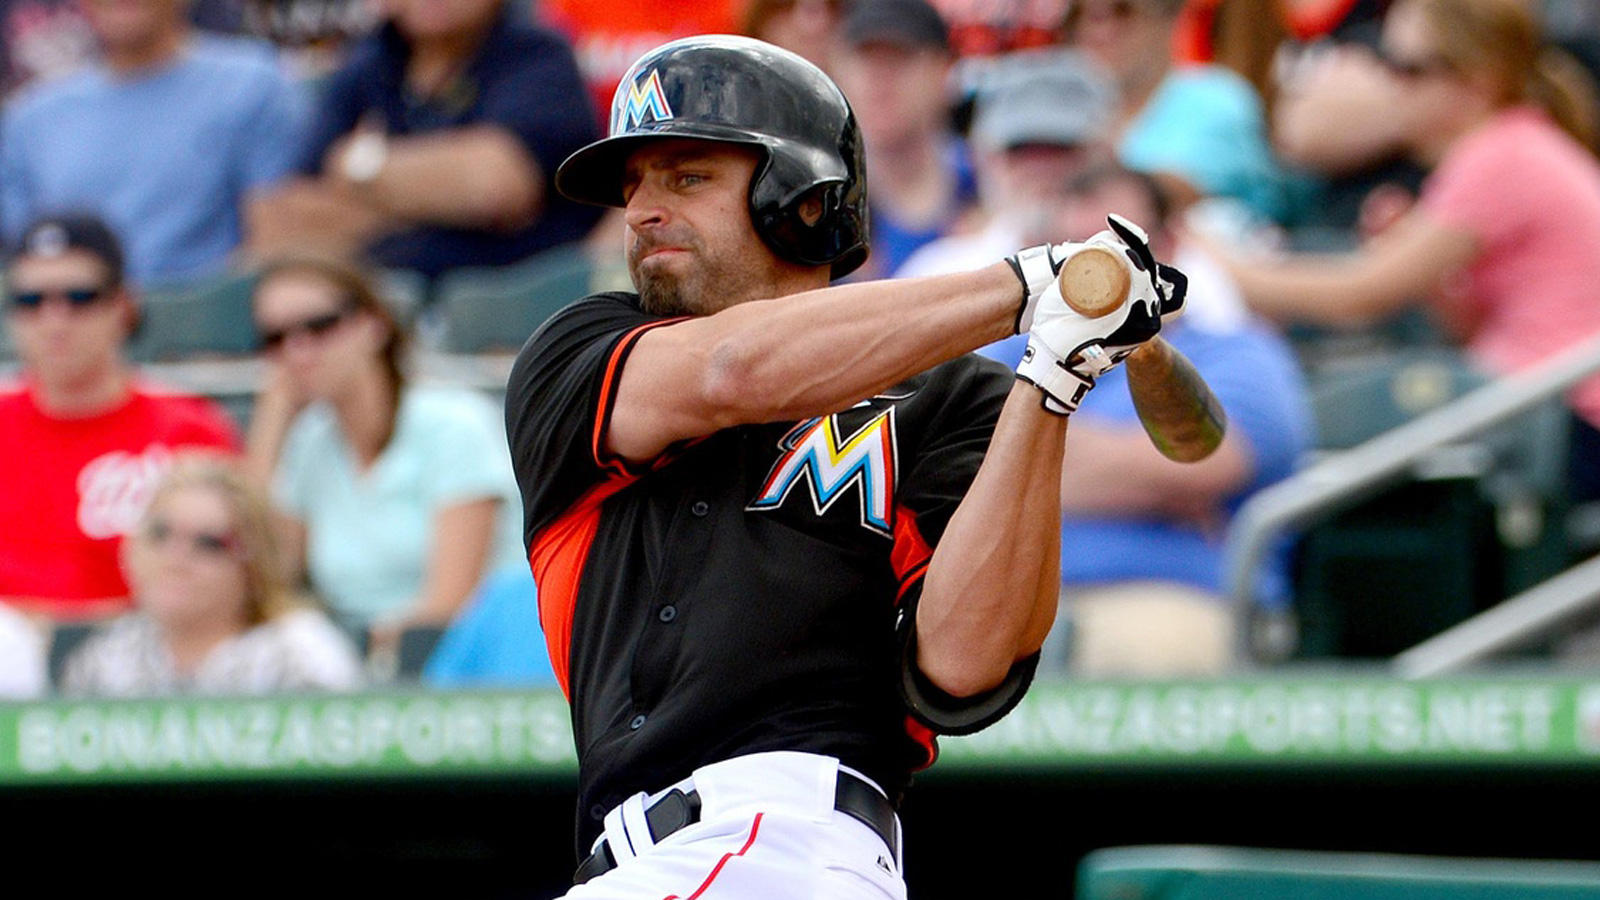 Reed Johnson makes Marlins at reserve, Ty Wigginton released